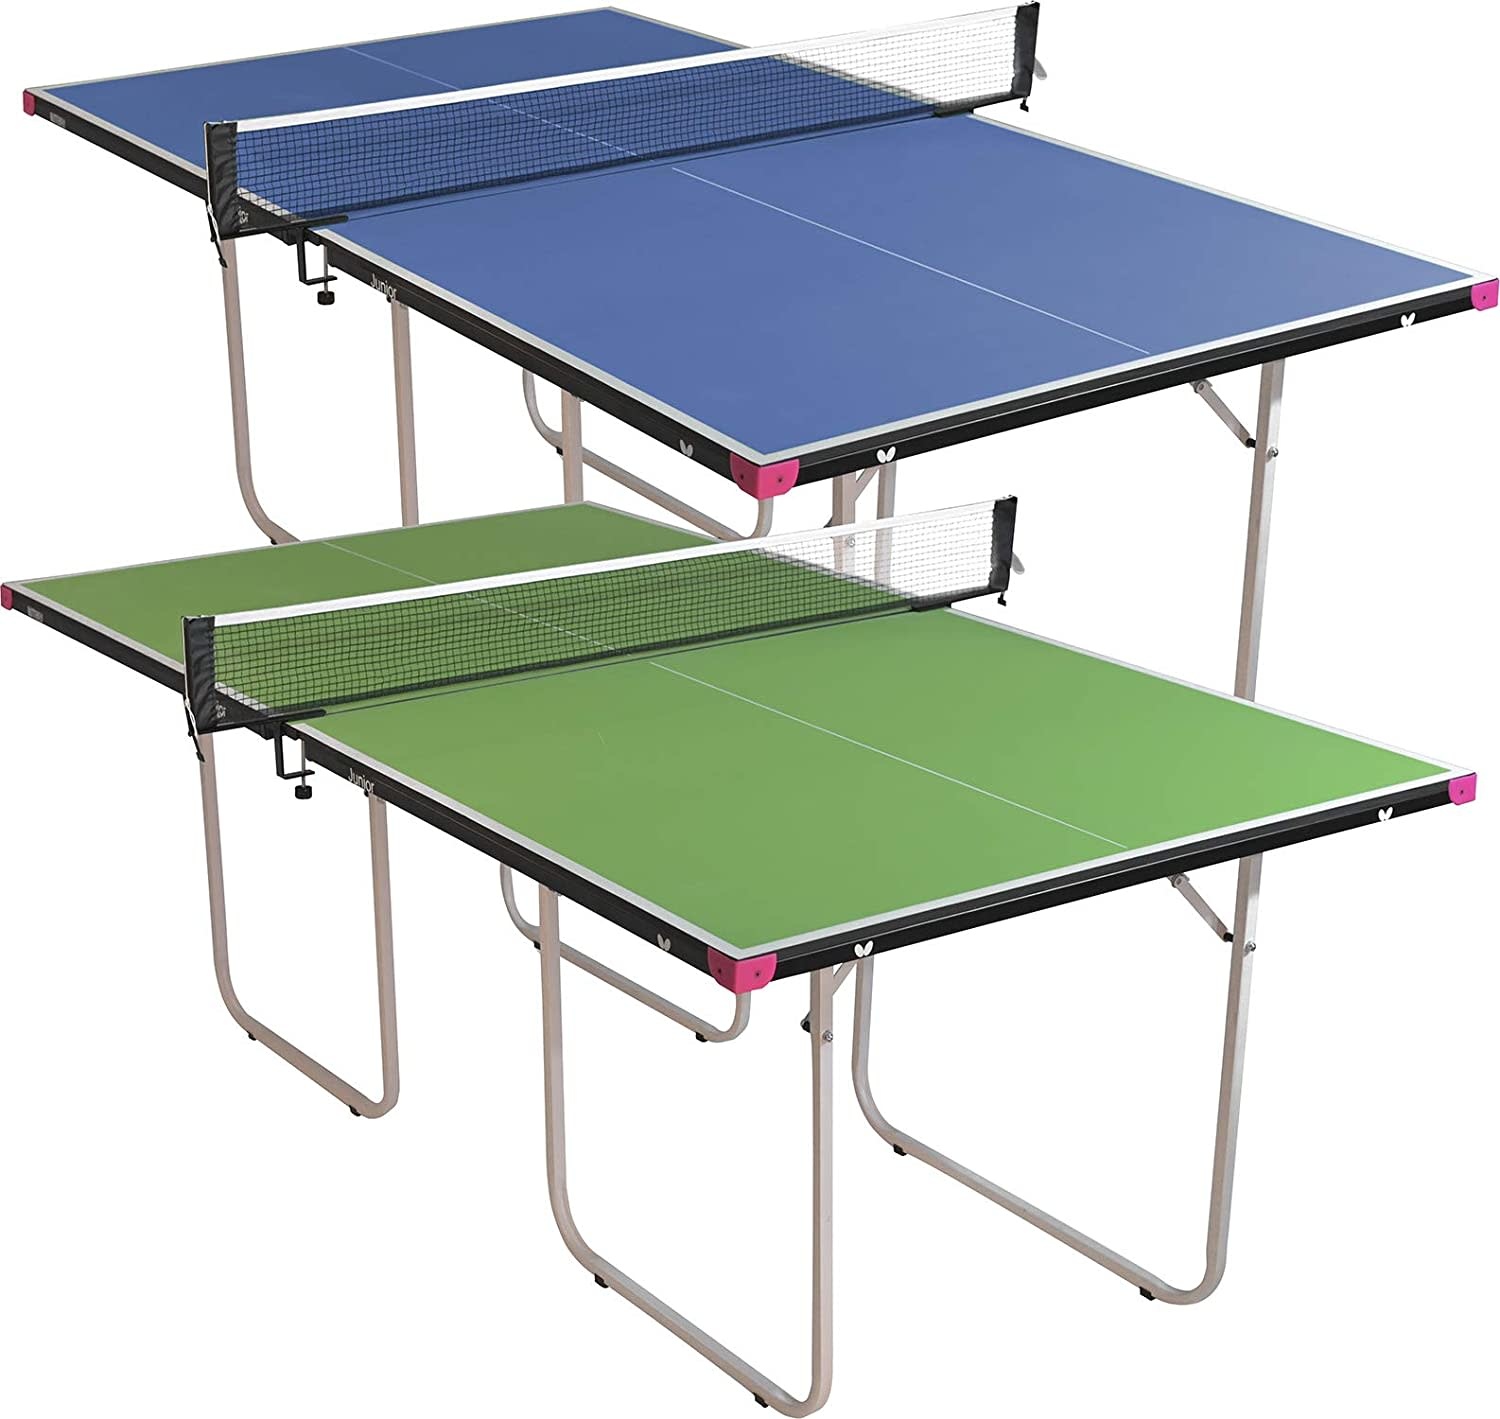 Hyper Pong 4 Way Table Tennis Table, Folding 4 Player 9mm thick Ping Pong  Table for Game Rooms and Basements